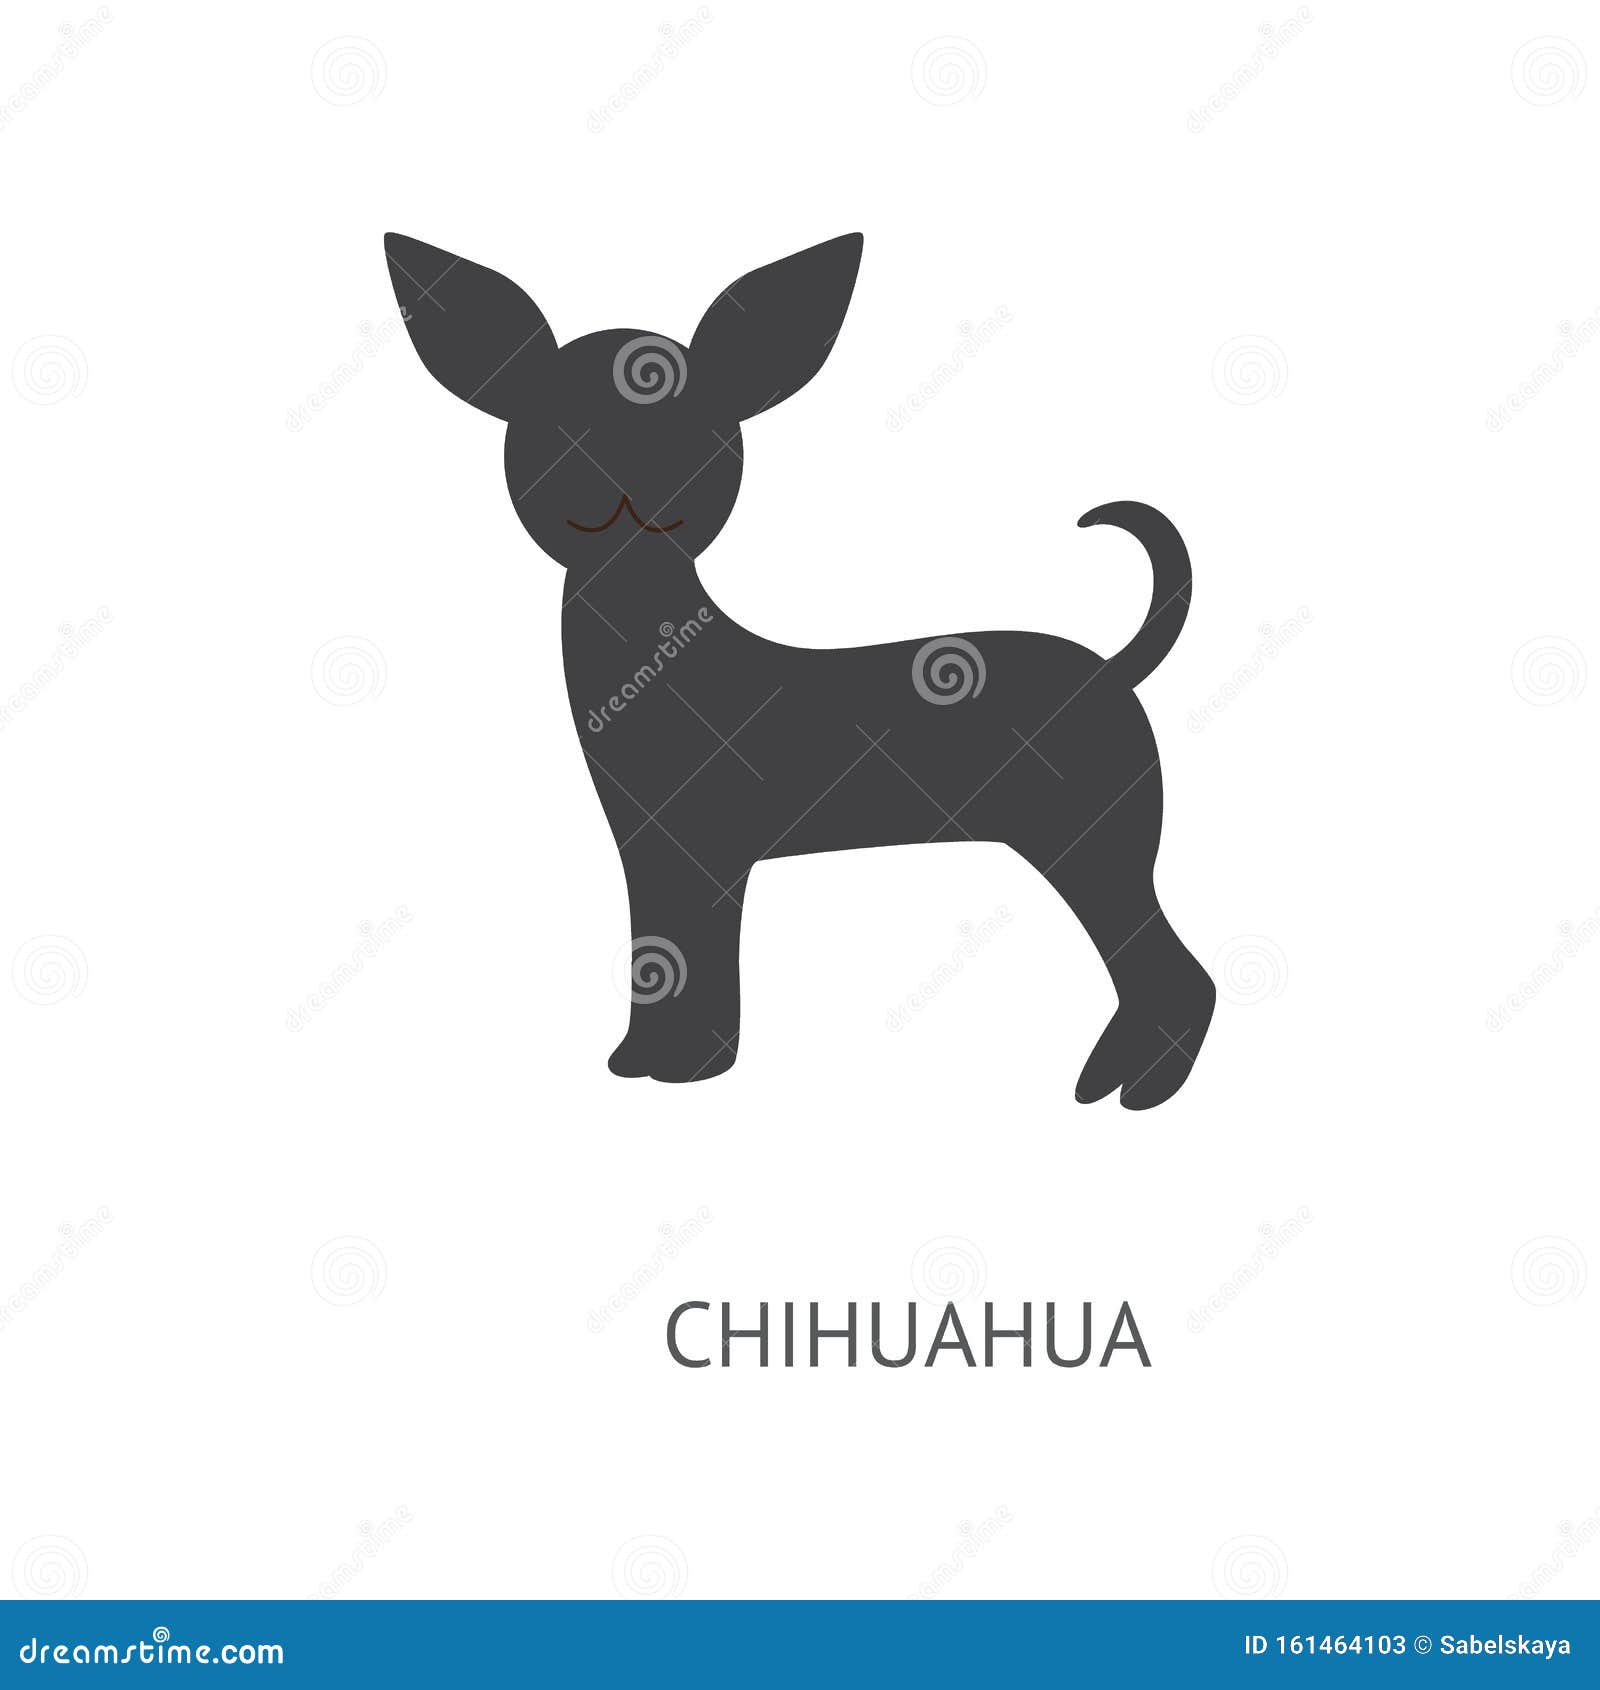 Chihuahua Silhouette Isolated on White Background - Black Cartoon Dog  Outline. Stock Vector - Illustration of black, fluffy: 161464103